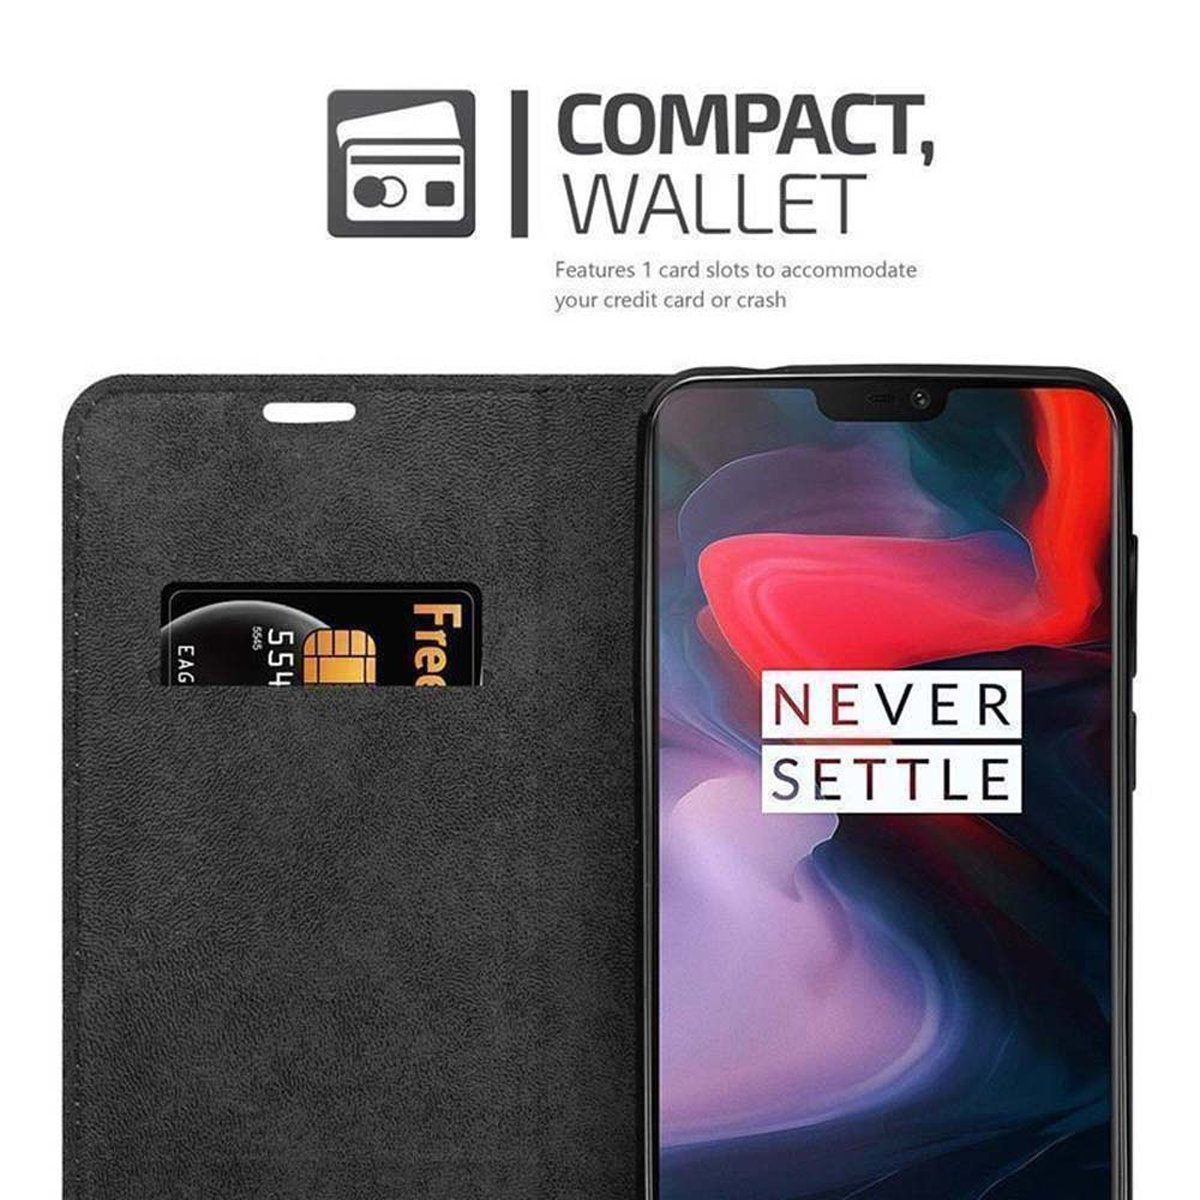 APFEL Bookcover, CADORABO OnePlus, Hülle Invisible Book 6, ROT Magnet,